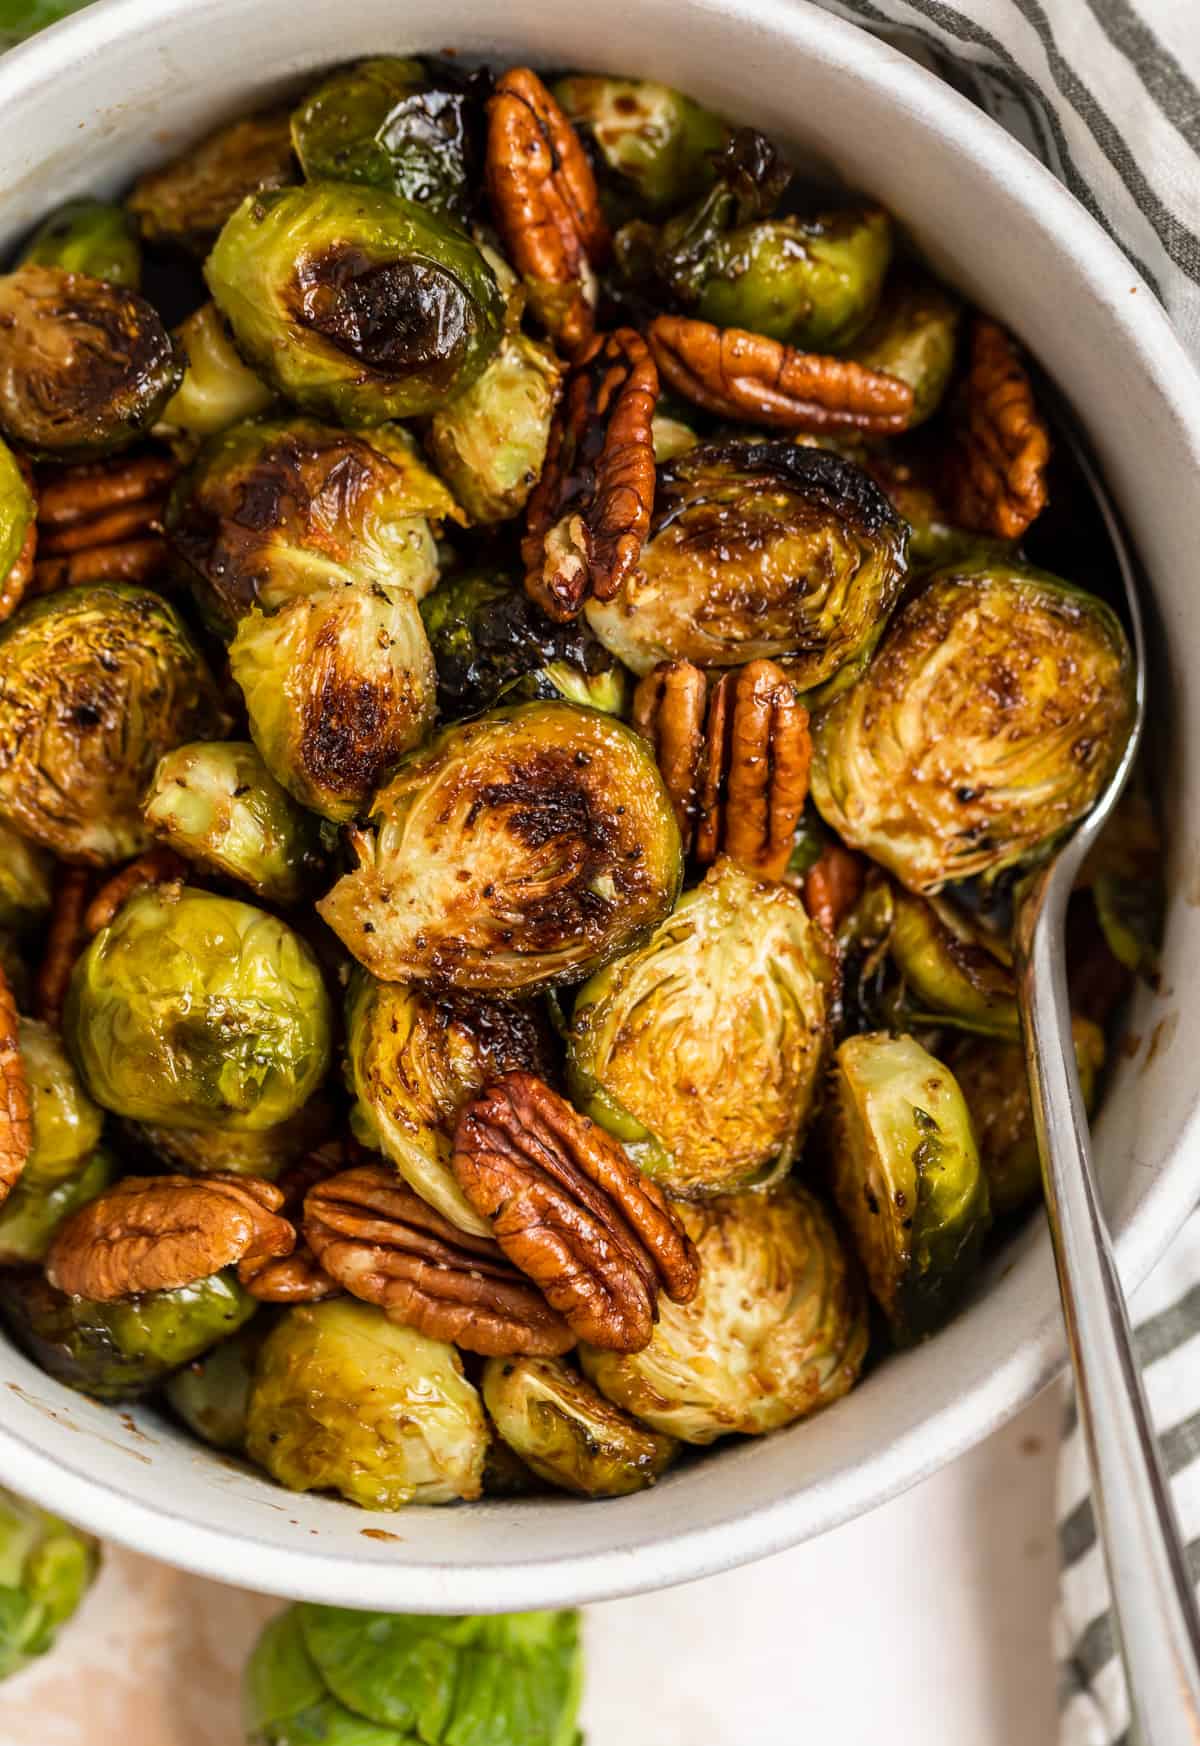 Roasted maple balsamic brussels sprouts in dish with pecans.